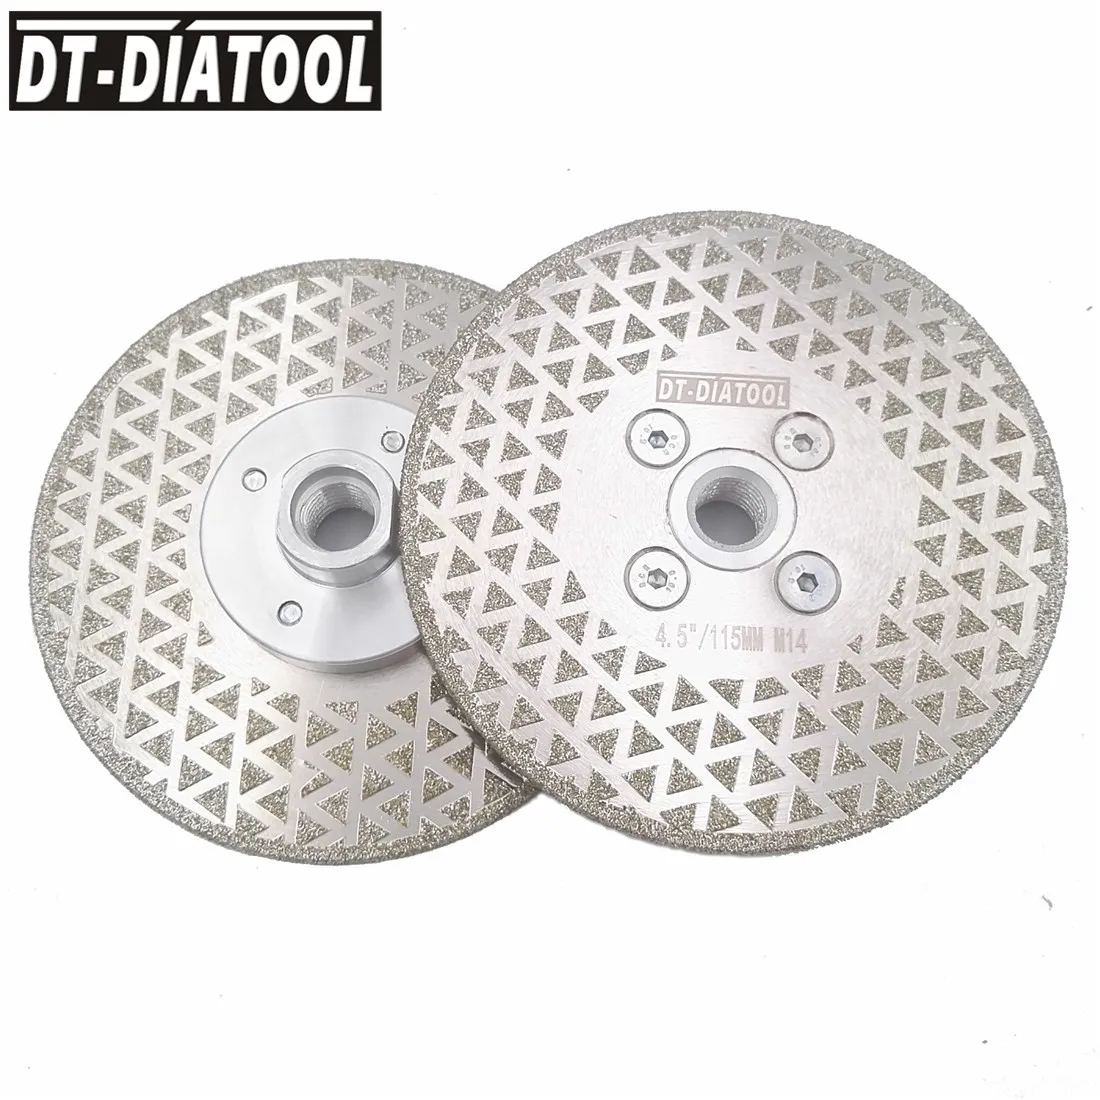 

DT-DIATOOL 2pcs/pk 115mm Electroplated Diamond Cutting Disc Grinding Wheel M14 Thread Both Side Coated Stone Marble 4.5 inches